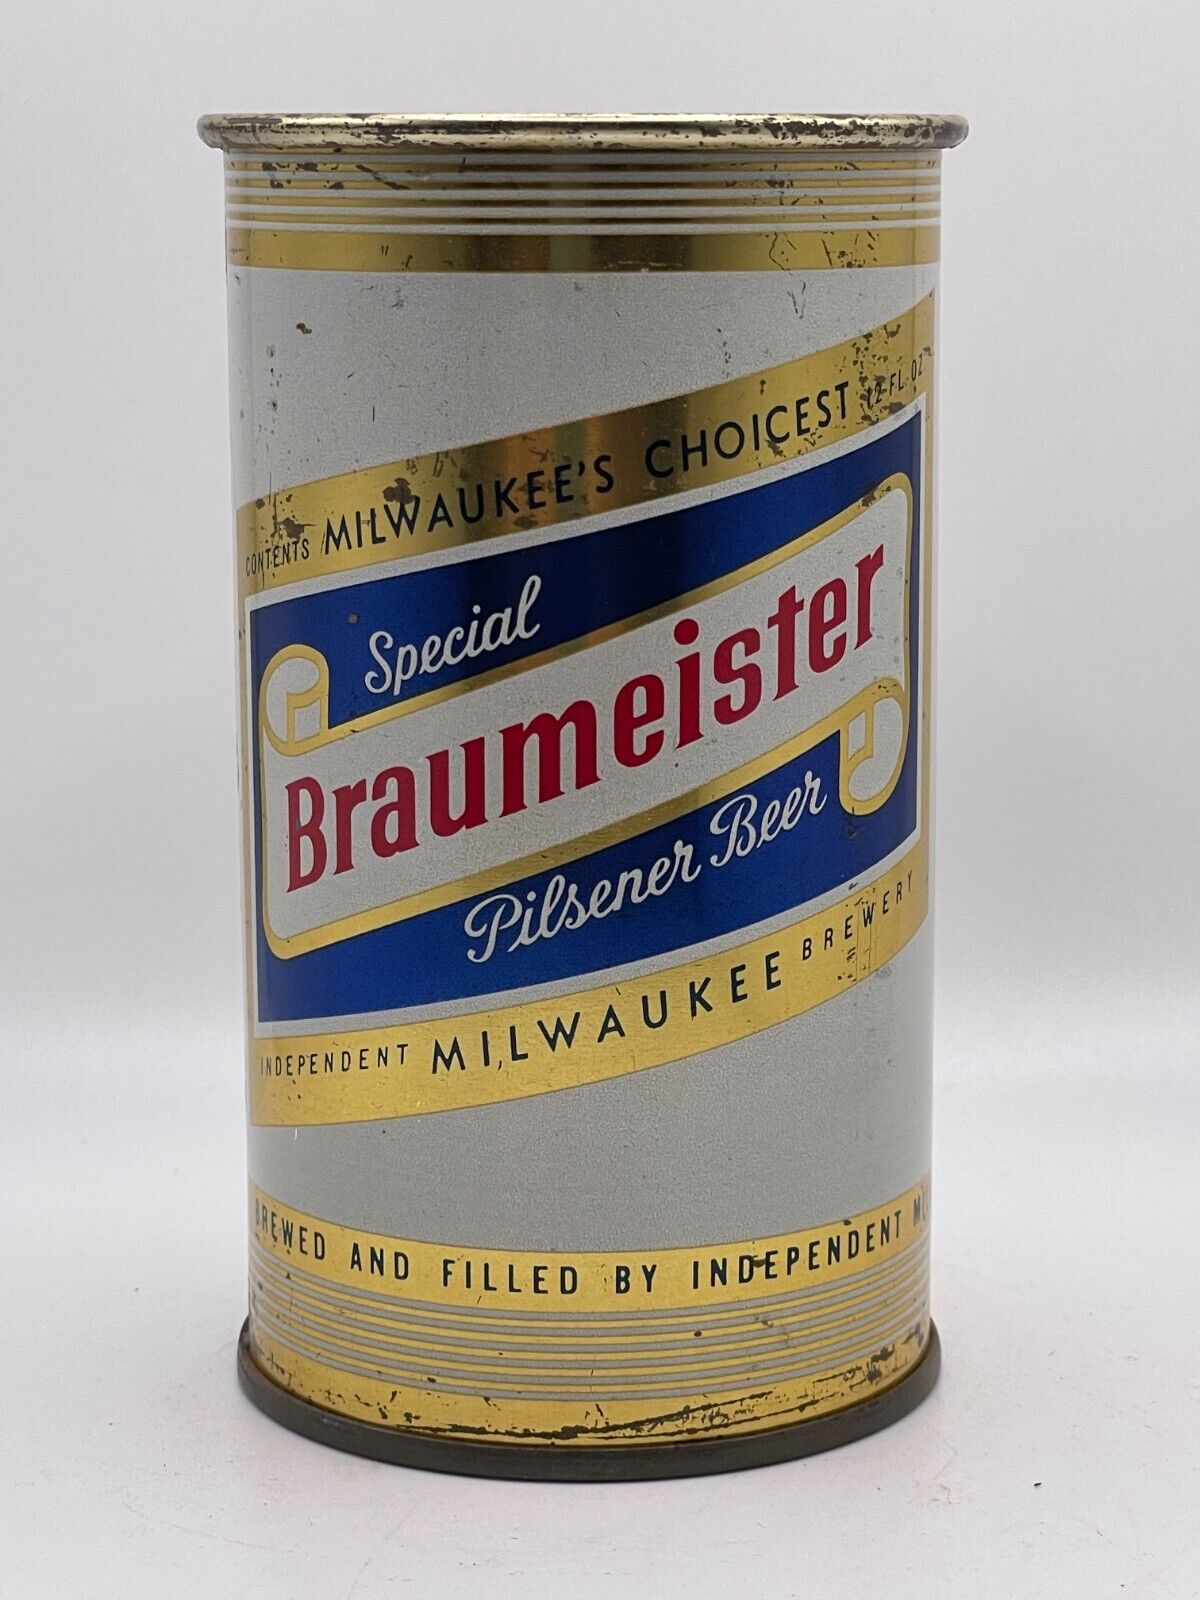 Braumeister Beer Flat Top Independent Milwaukee Brewery Milwaukee Wi